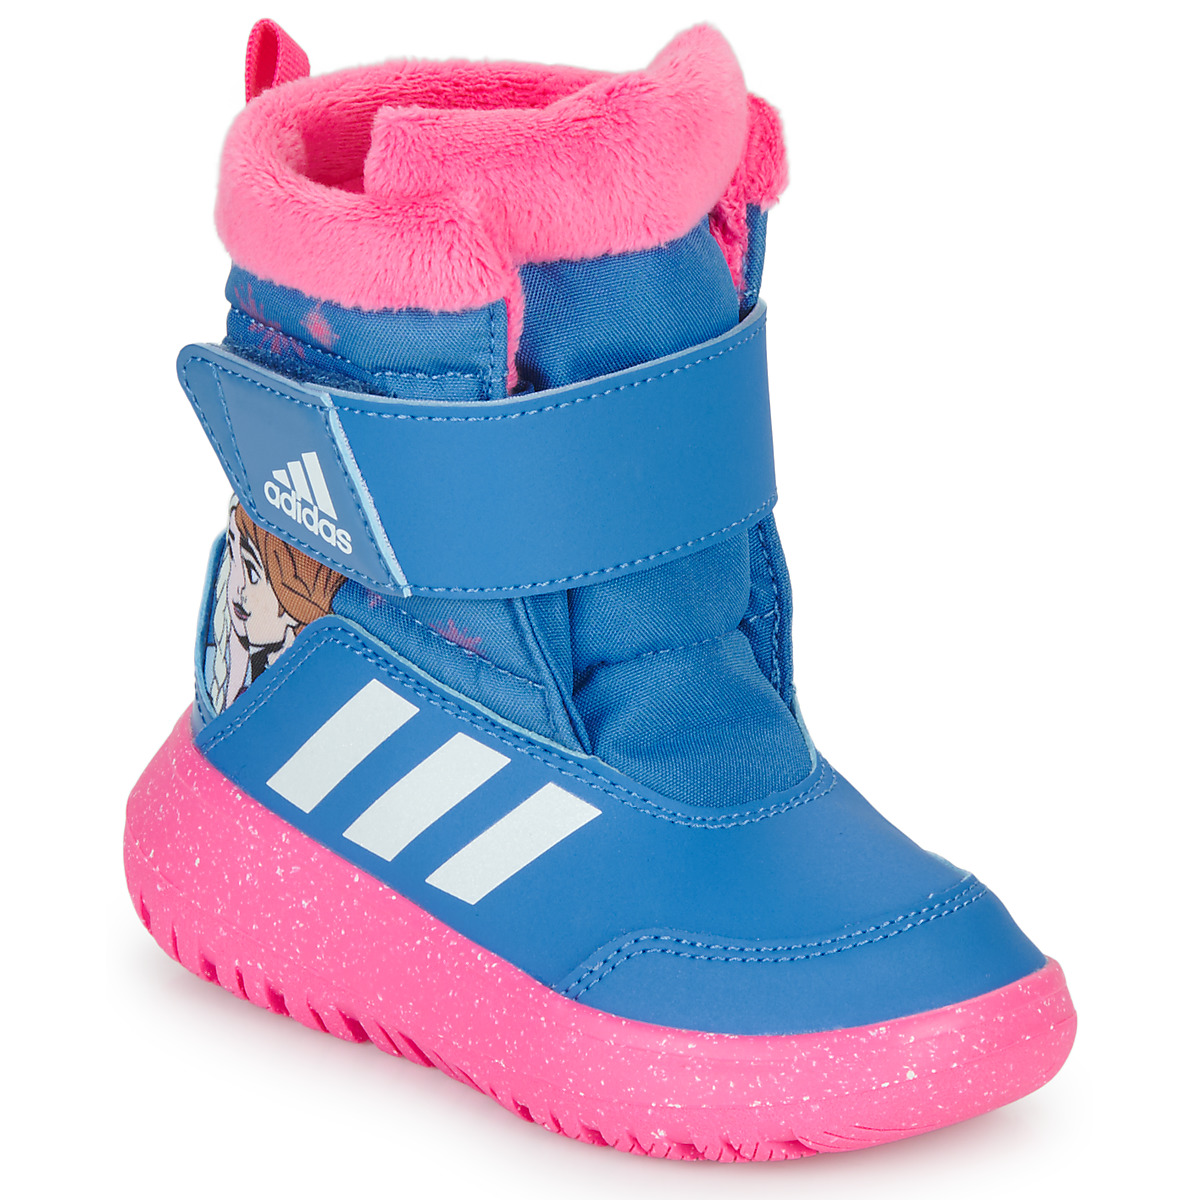 boots - Snow Performance Free Shoes / NET delivery Child - Blue | ! WINTERPLAY adidas I Frozen Pink Spartoo